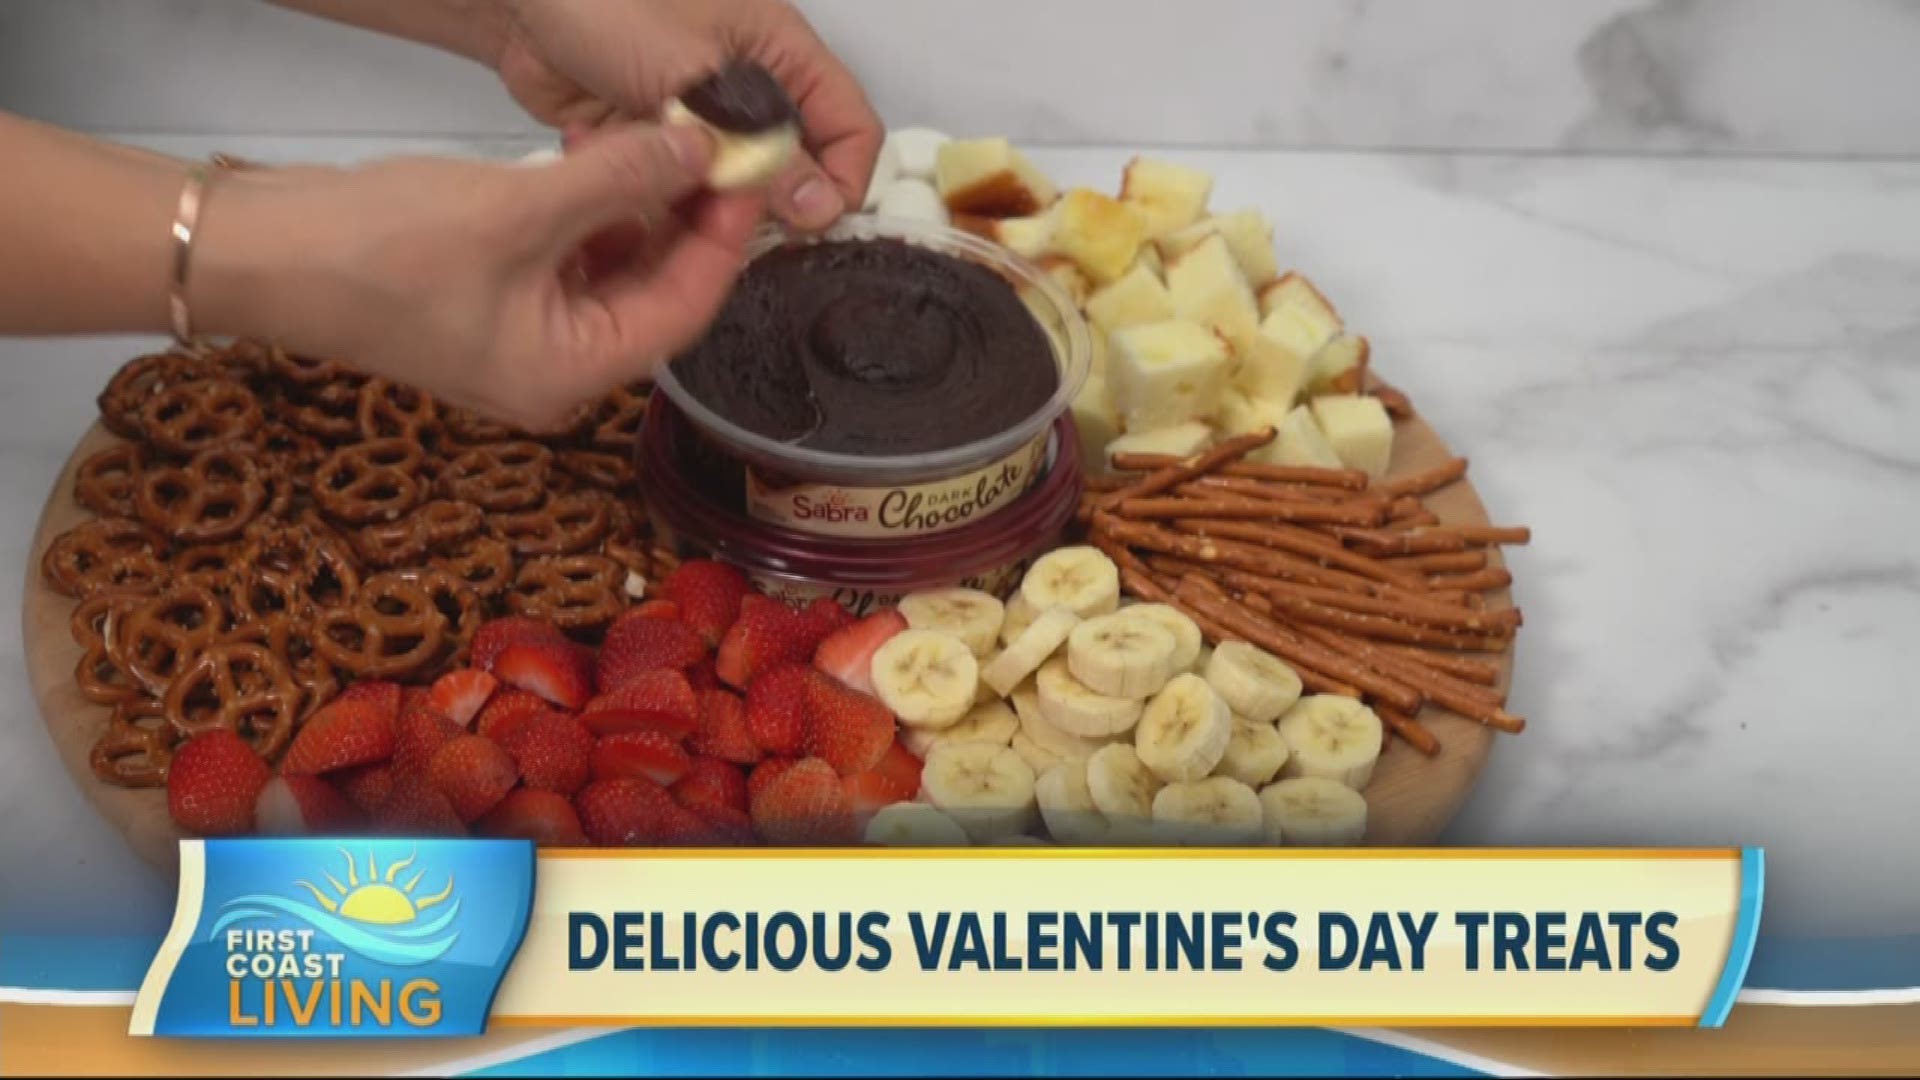 Sweet treats for your sweetheart!